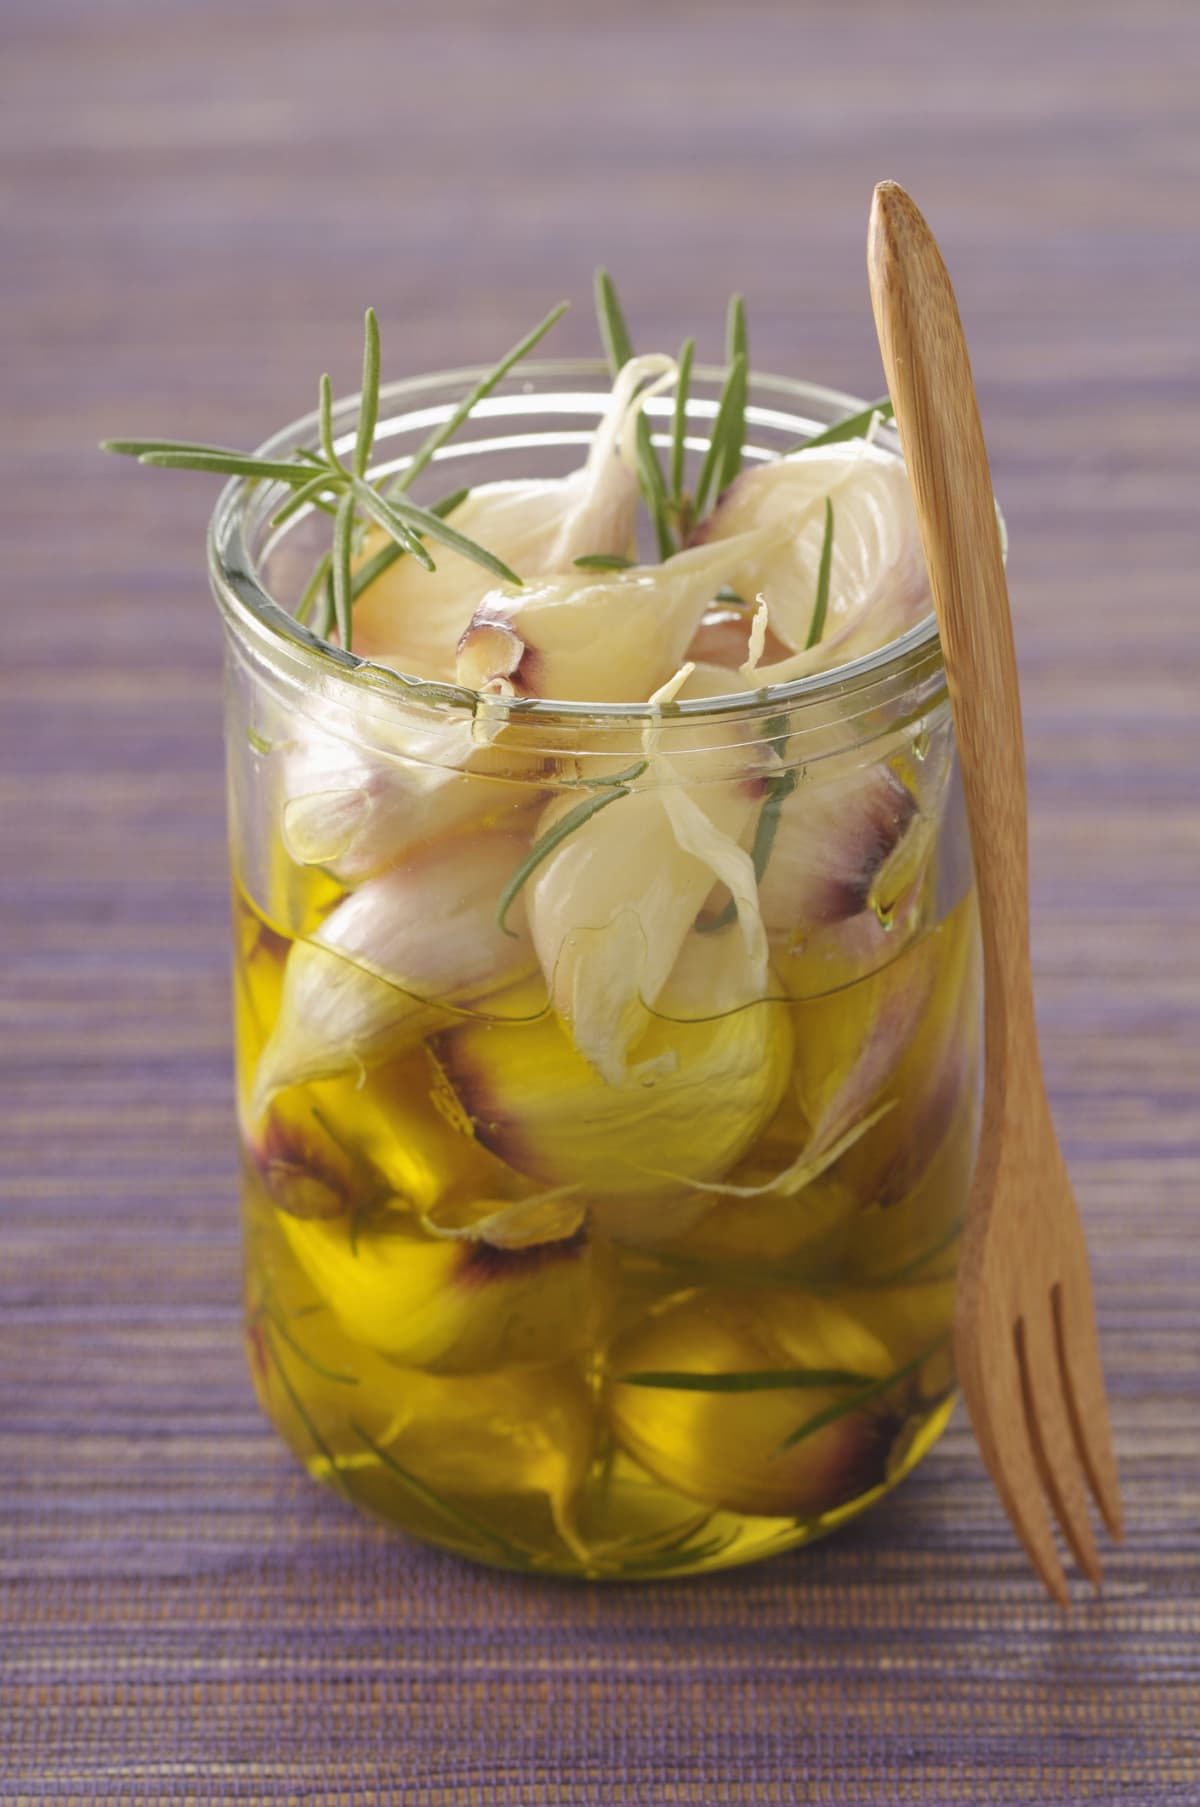 Preserved garlic in olive oil and rosemary